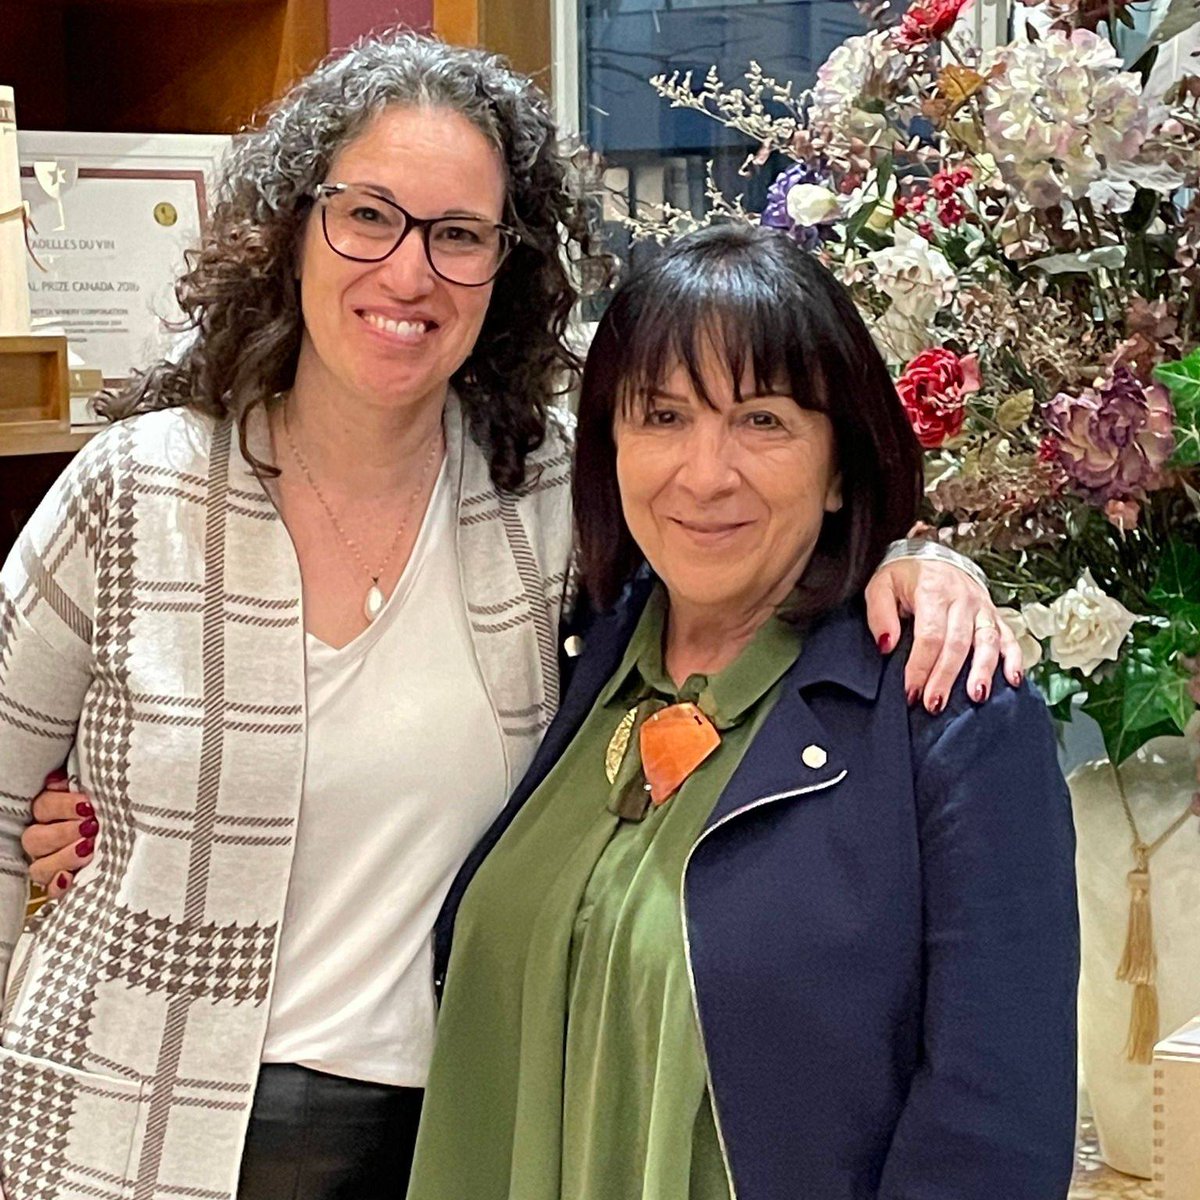 We absolutely love to meet others who are dedicated to the fight against tick-borne and vector diseases, and this week we had the great pleasure of visiting with Rossana Magnotta, President and Founder of the G. Magnotta Foundation for Vector-Borne Diseases.